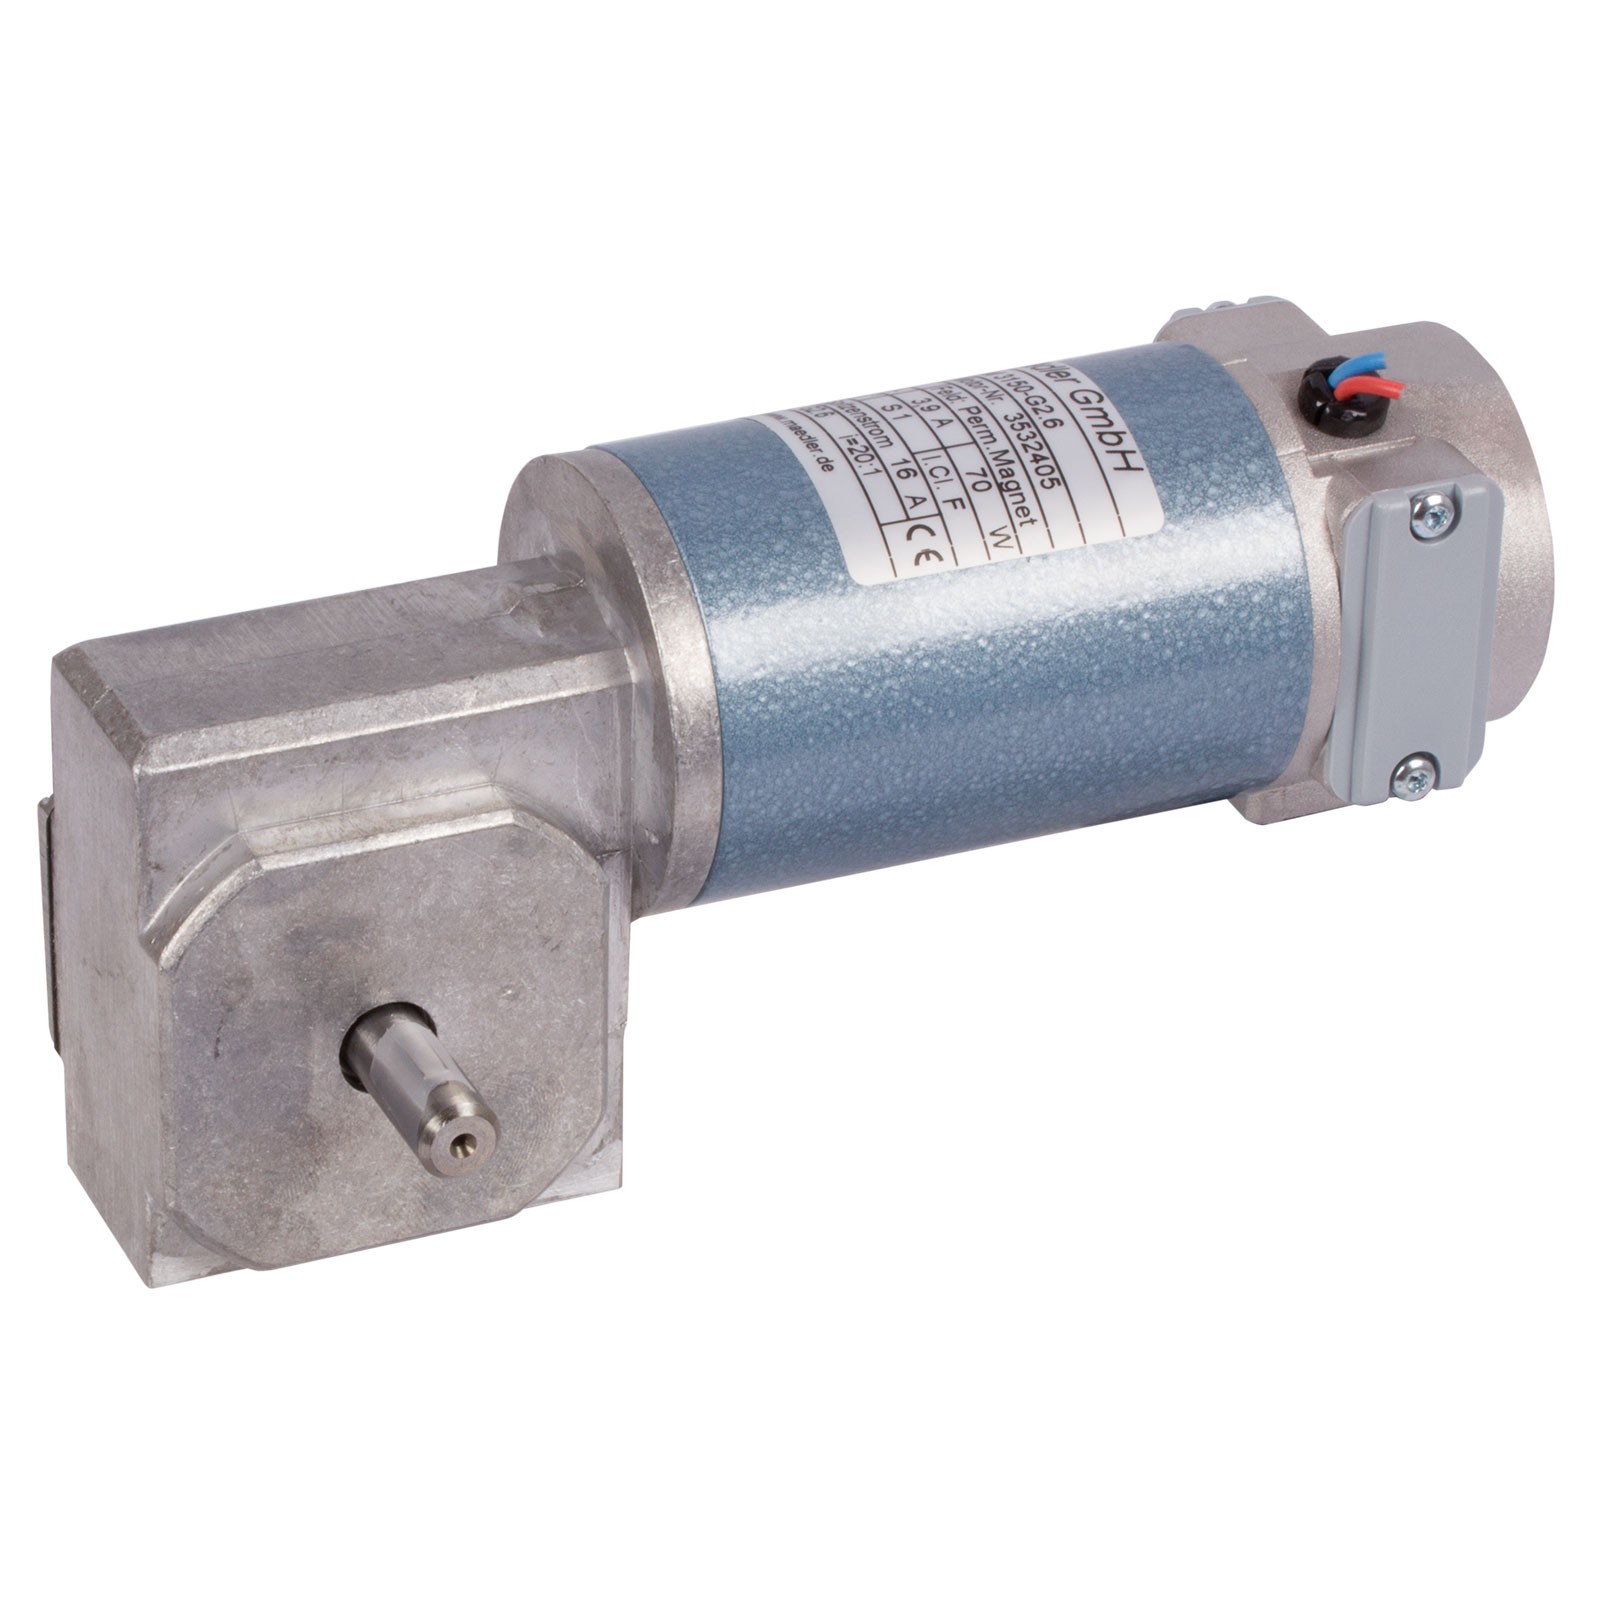 Small geared motor SE with DC motor 24V size 3 n2=276 rpm i=14.5:1